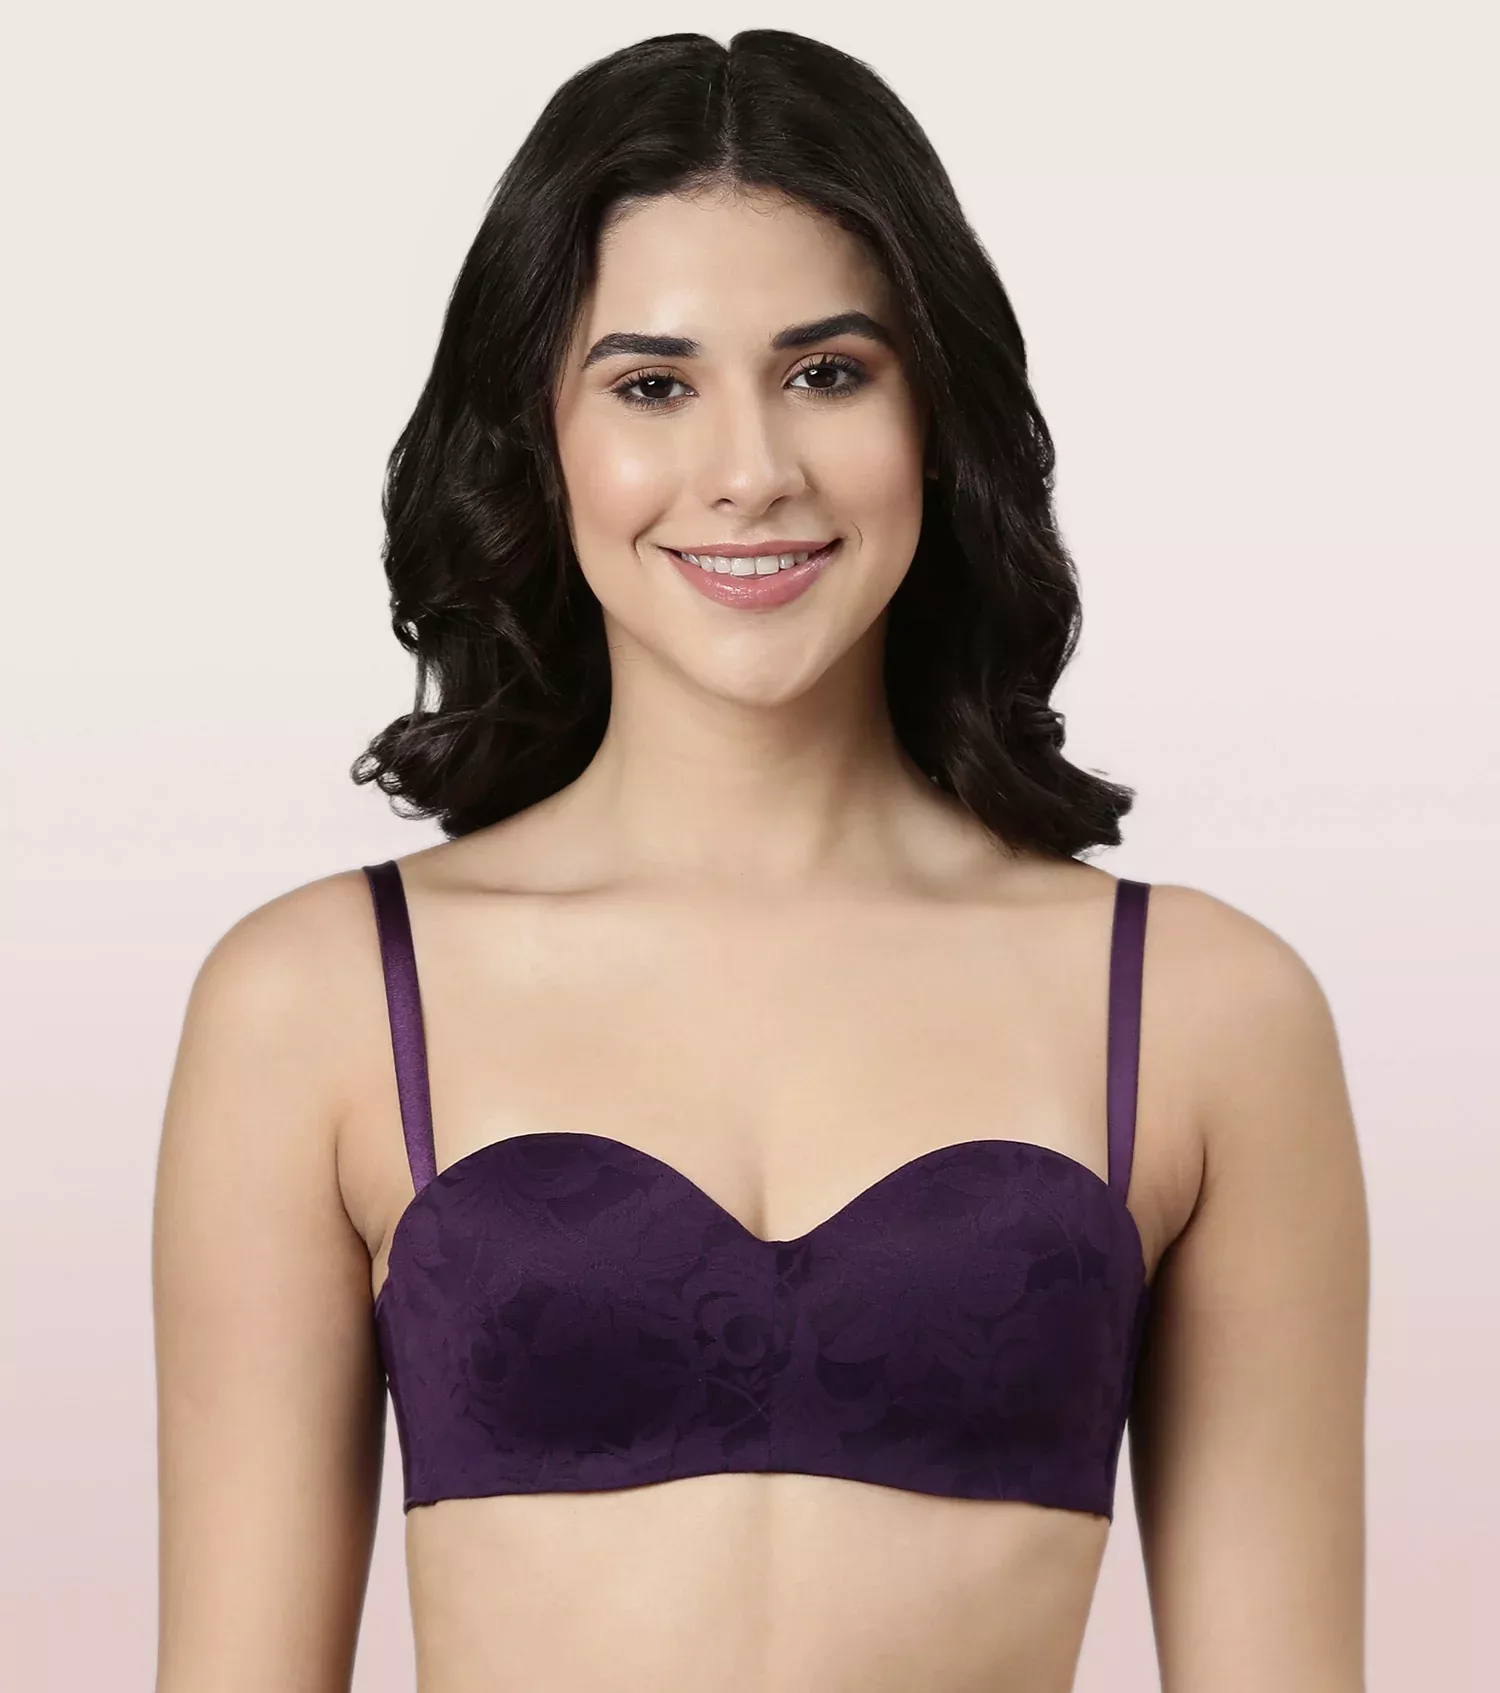 Buy Lingerie Online From WomanCart - Embrace Your Confidence